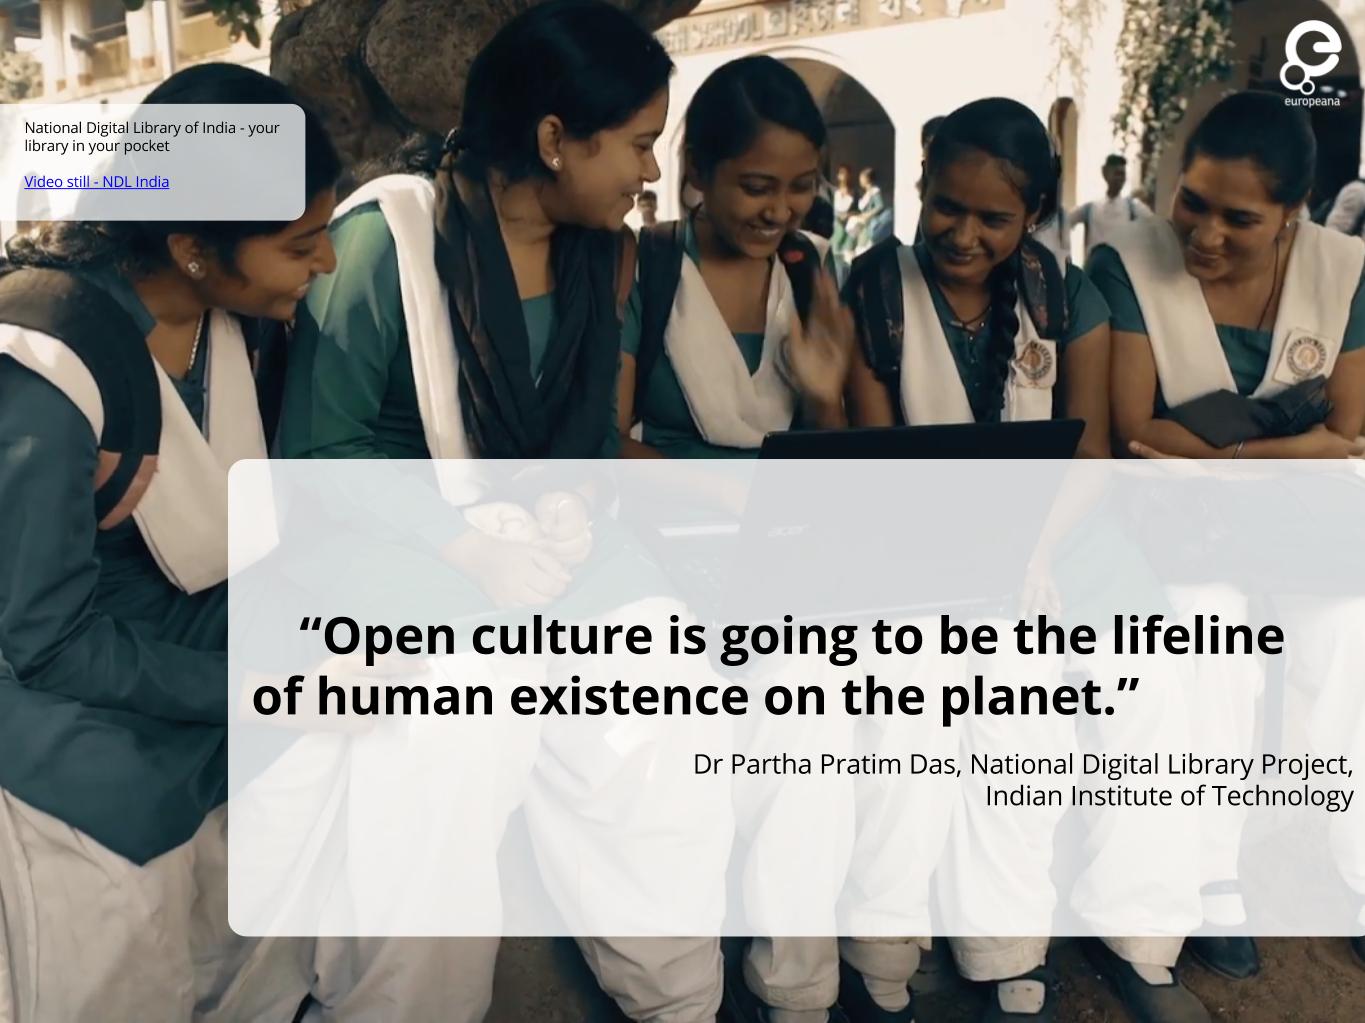 Quote from Dr Partha Pratim Das - 'Open culture is going to be the lifeline of human existence on the planet'